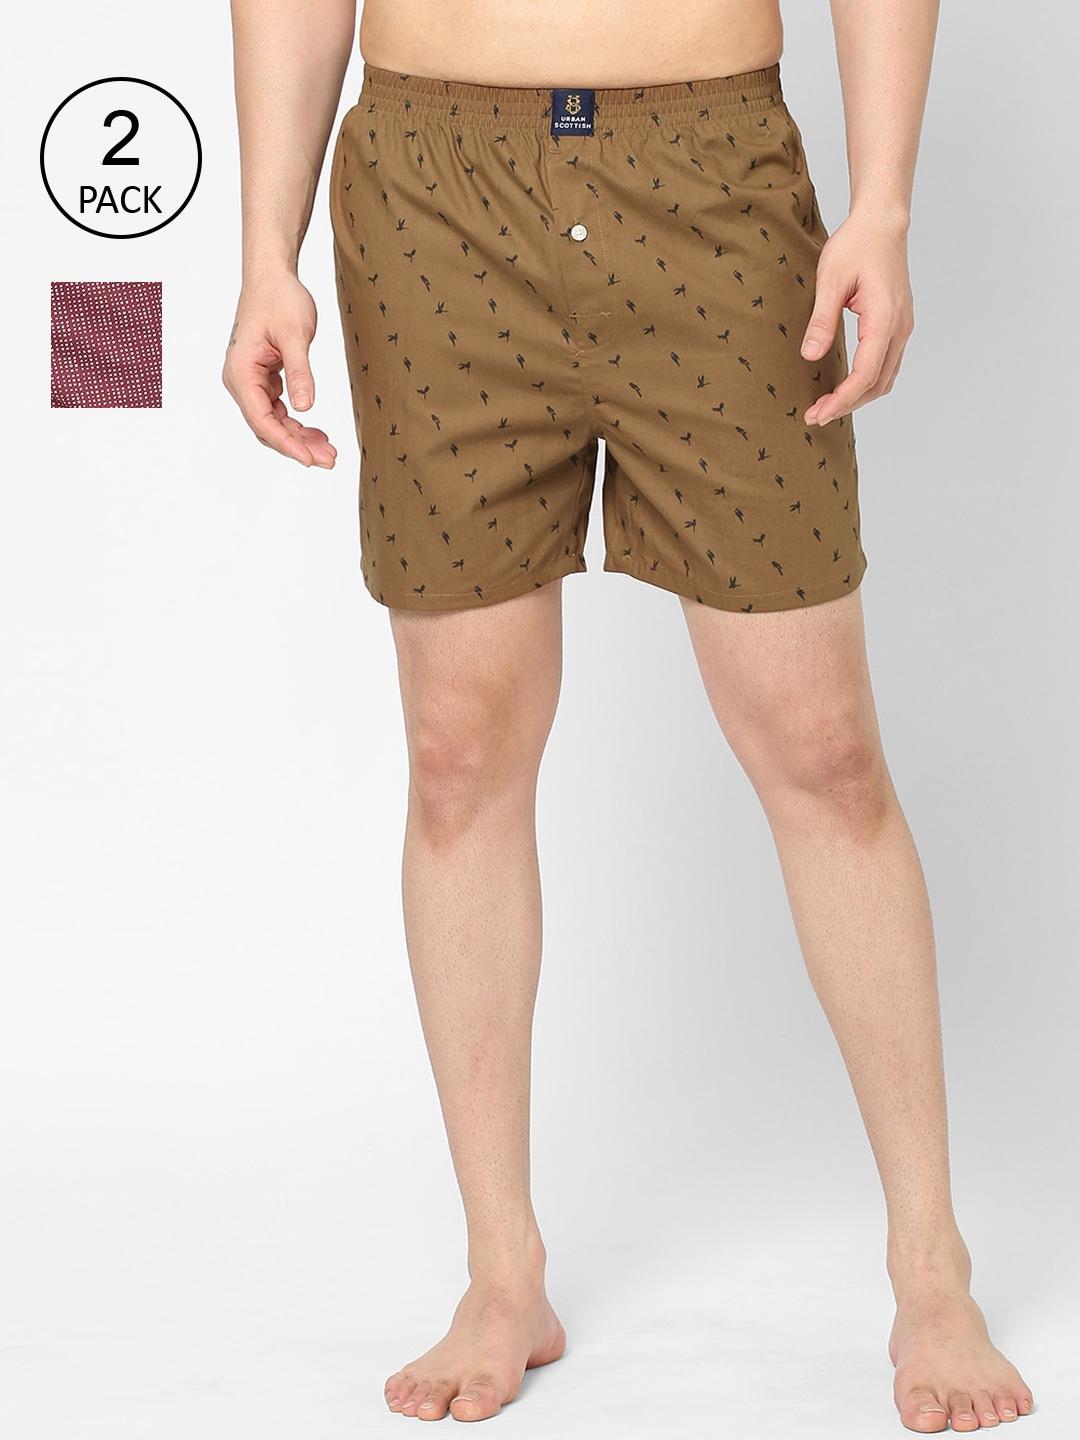 urban-scottish-men-pack-of-2-red-&-brown-printed-cotton-boxers-usbx2295-s